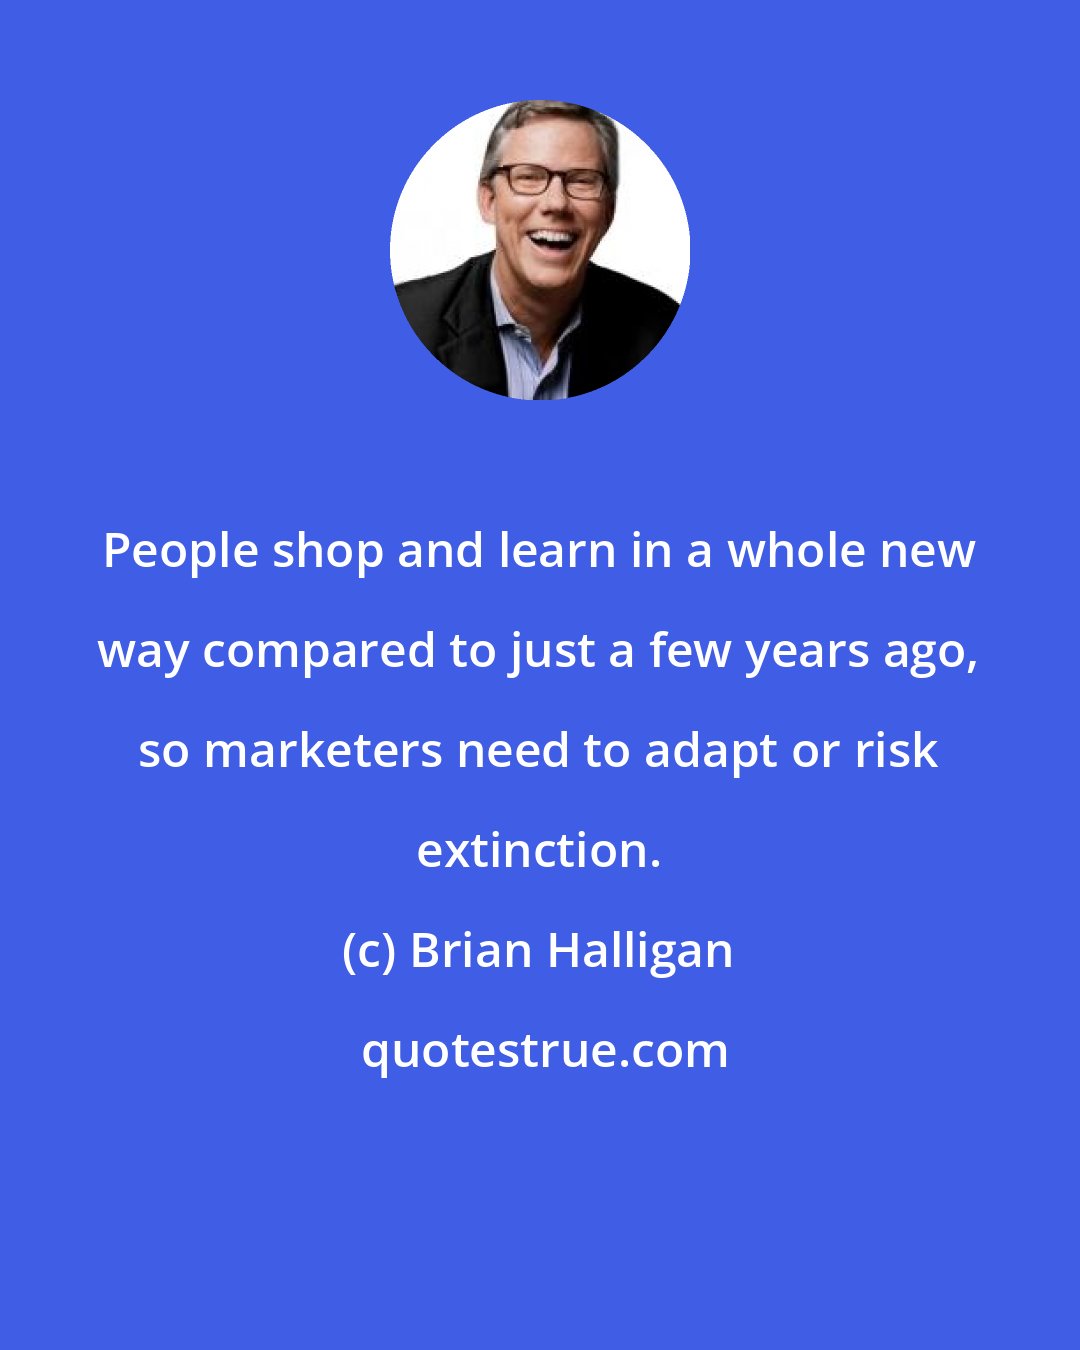 Brian Halligan: People shop and learn in a whole new way compared to just a few years ago, so marketers need to adapt or risk extinction.